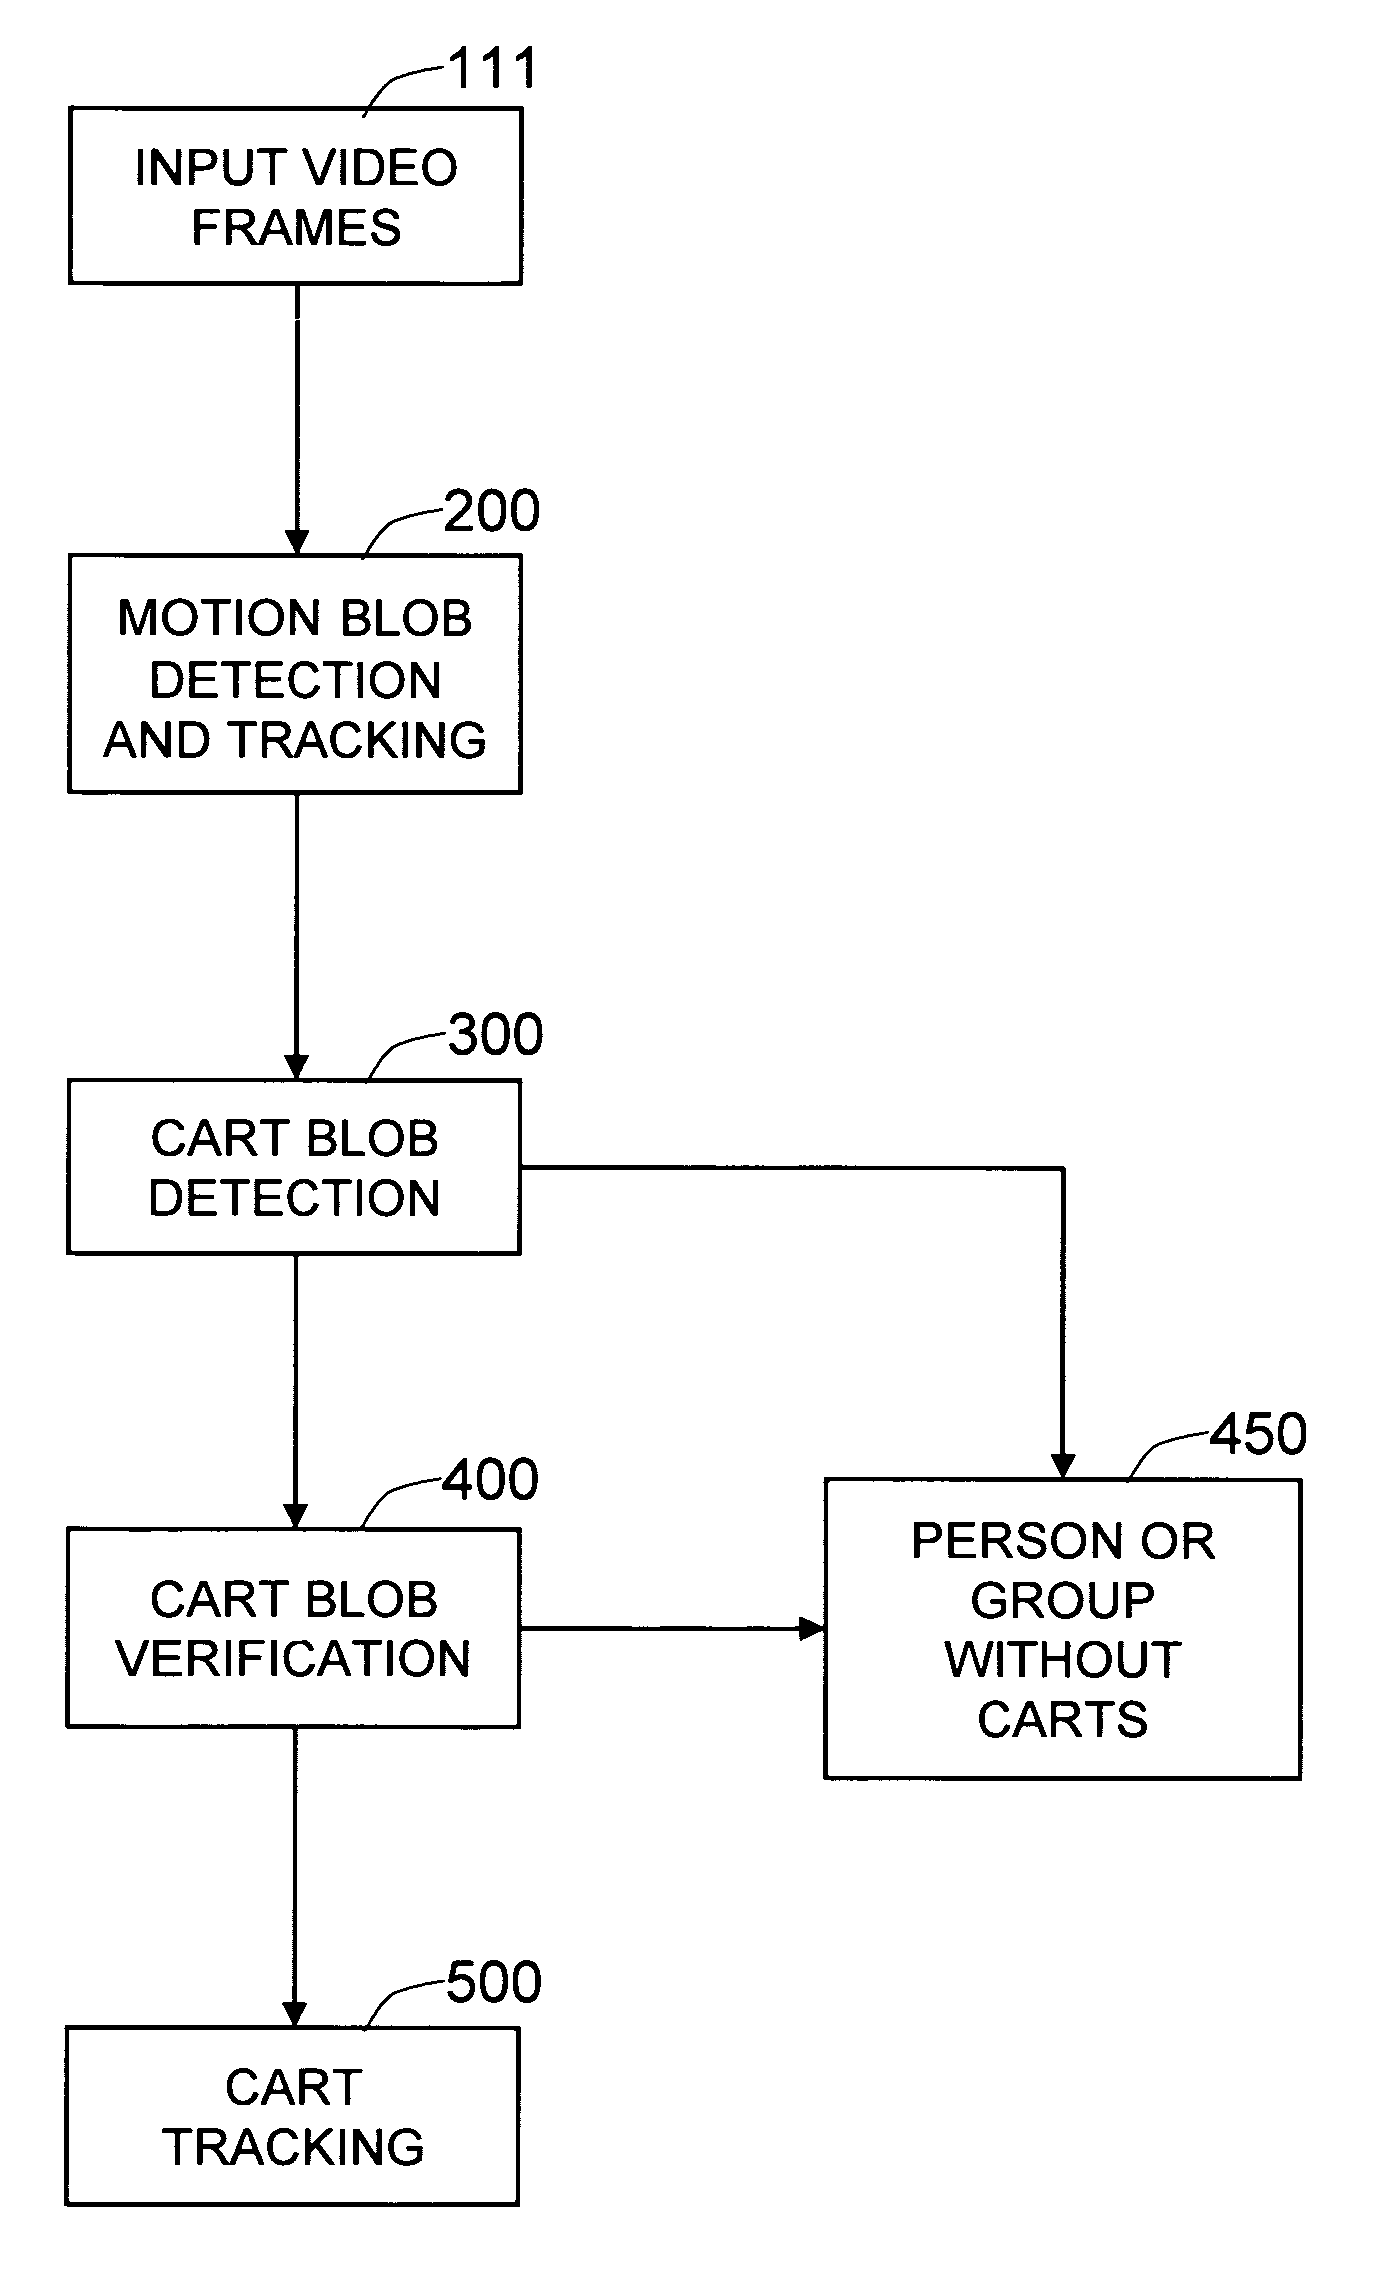 Method and system for detecting and tracking shopping carts from videos